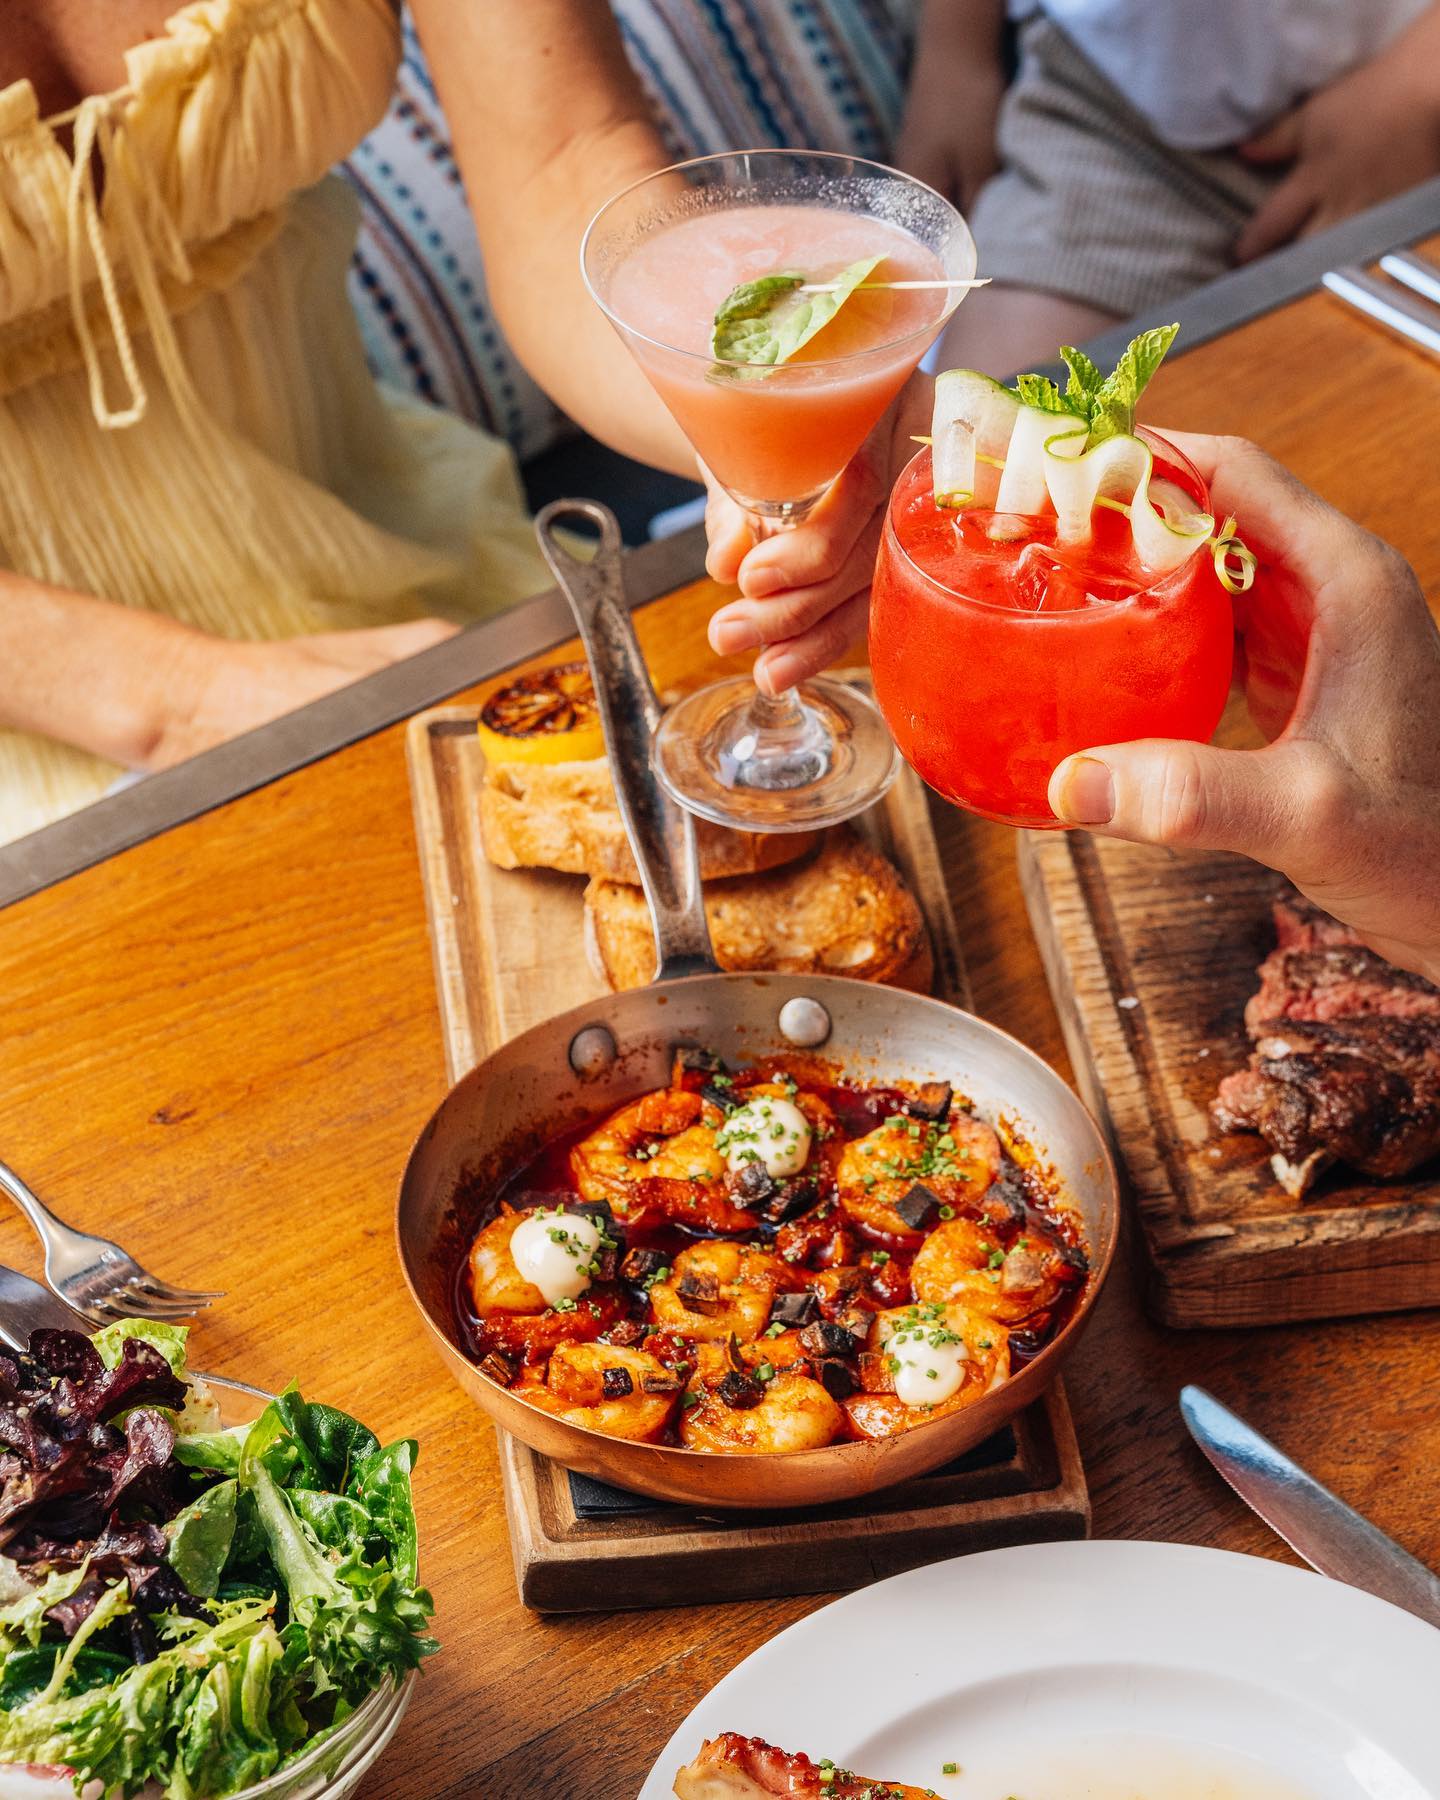 Gather for gourmet moments under the open sky @quinto.miami serving up Latin cuisine with a wood-fired twist #atEAST